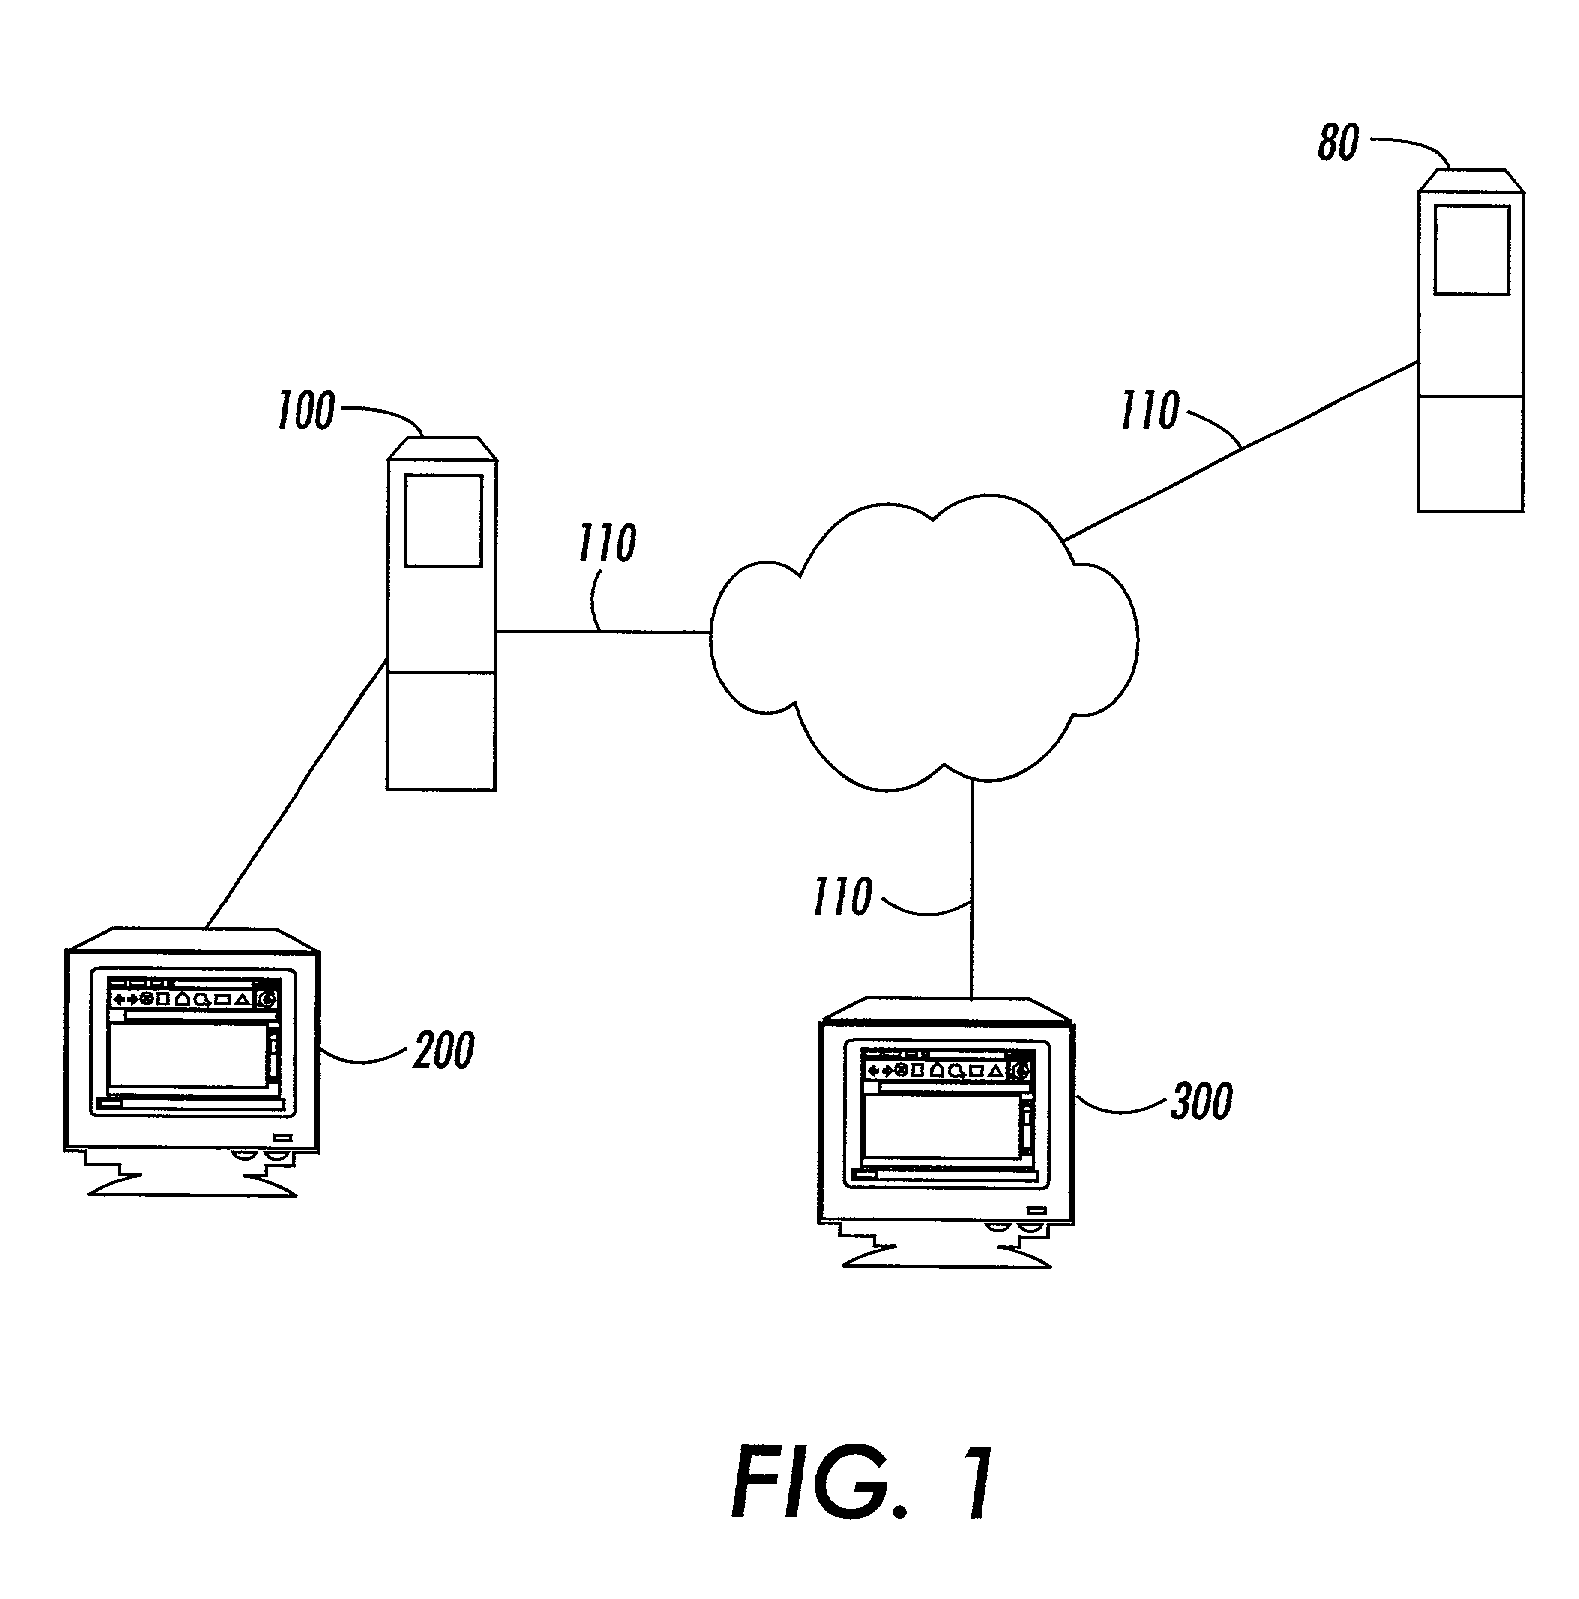 Systems and methods for combined browsing and searching in a document collection based on information scent